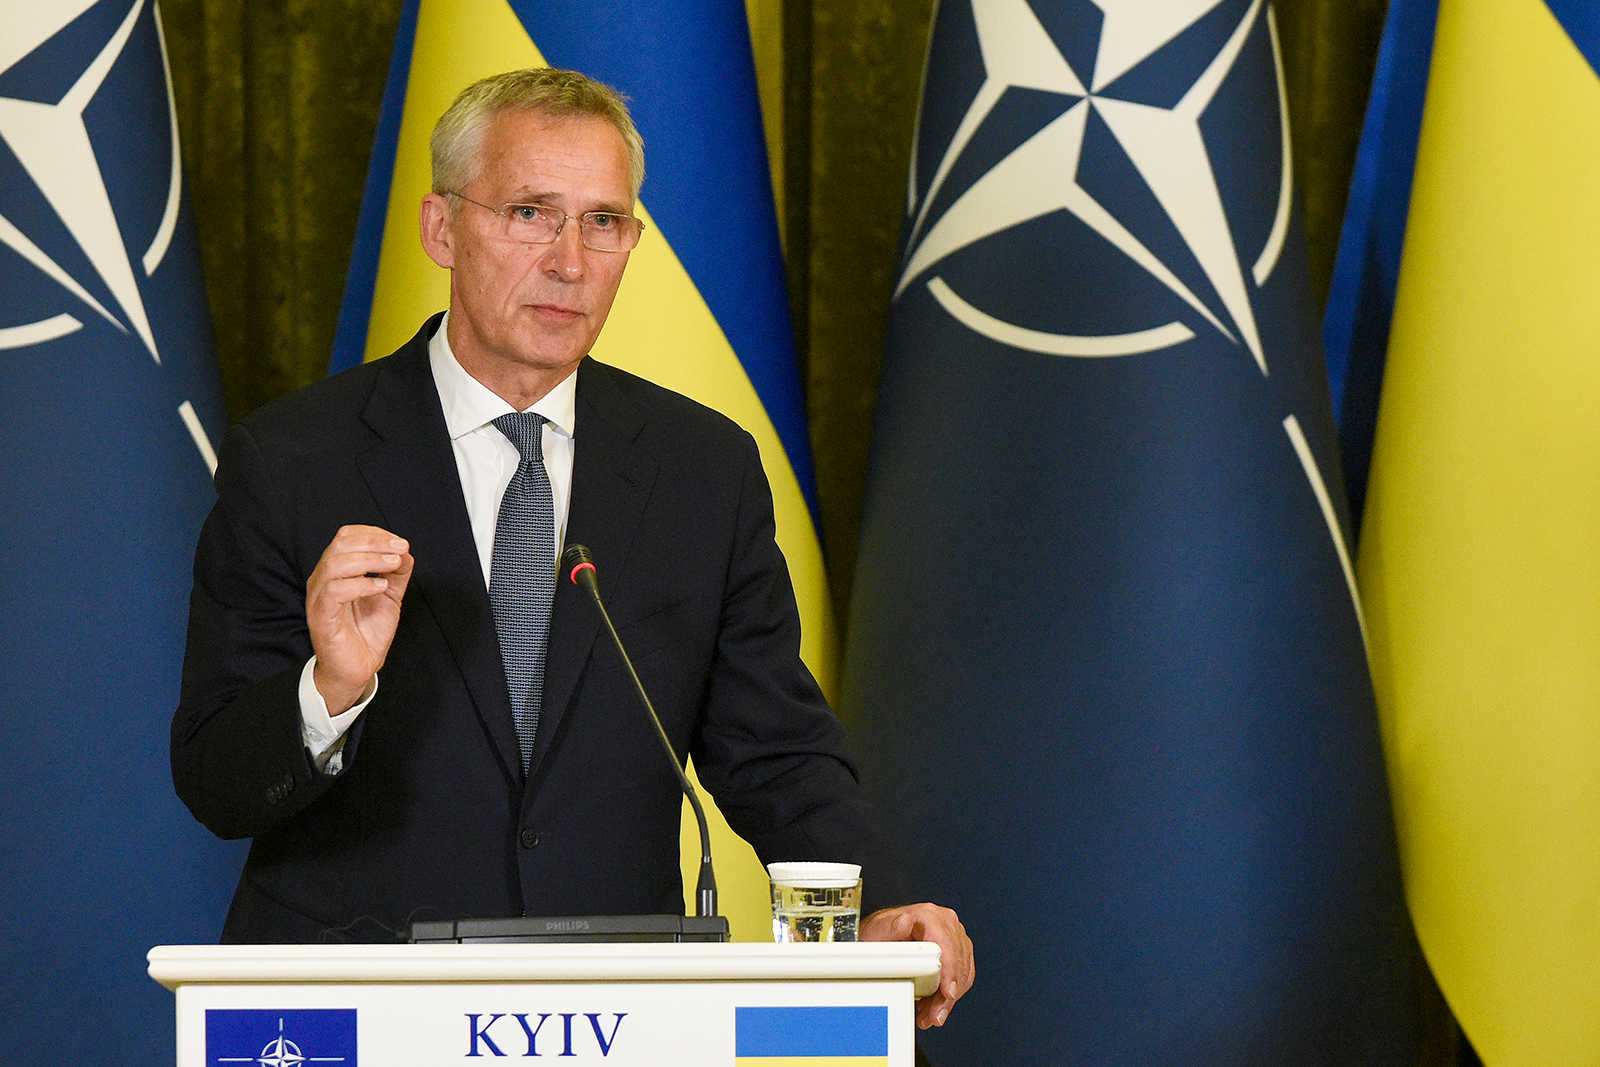 Jens Stoltenberg is pictured during a joint meeting in Kyiv, Ukraine on September 28.